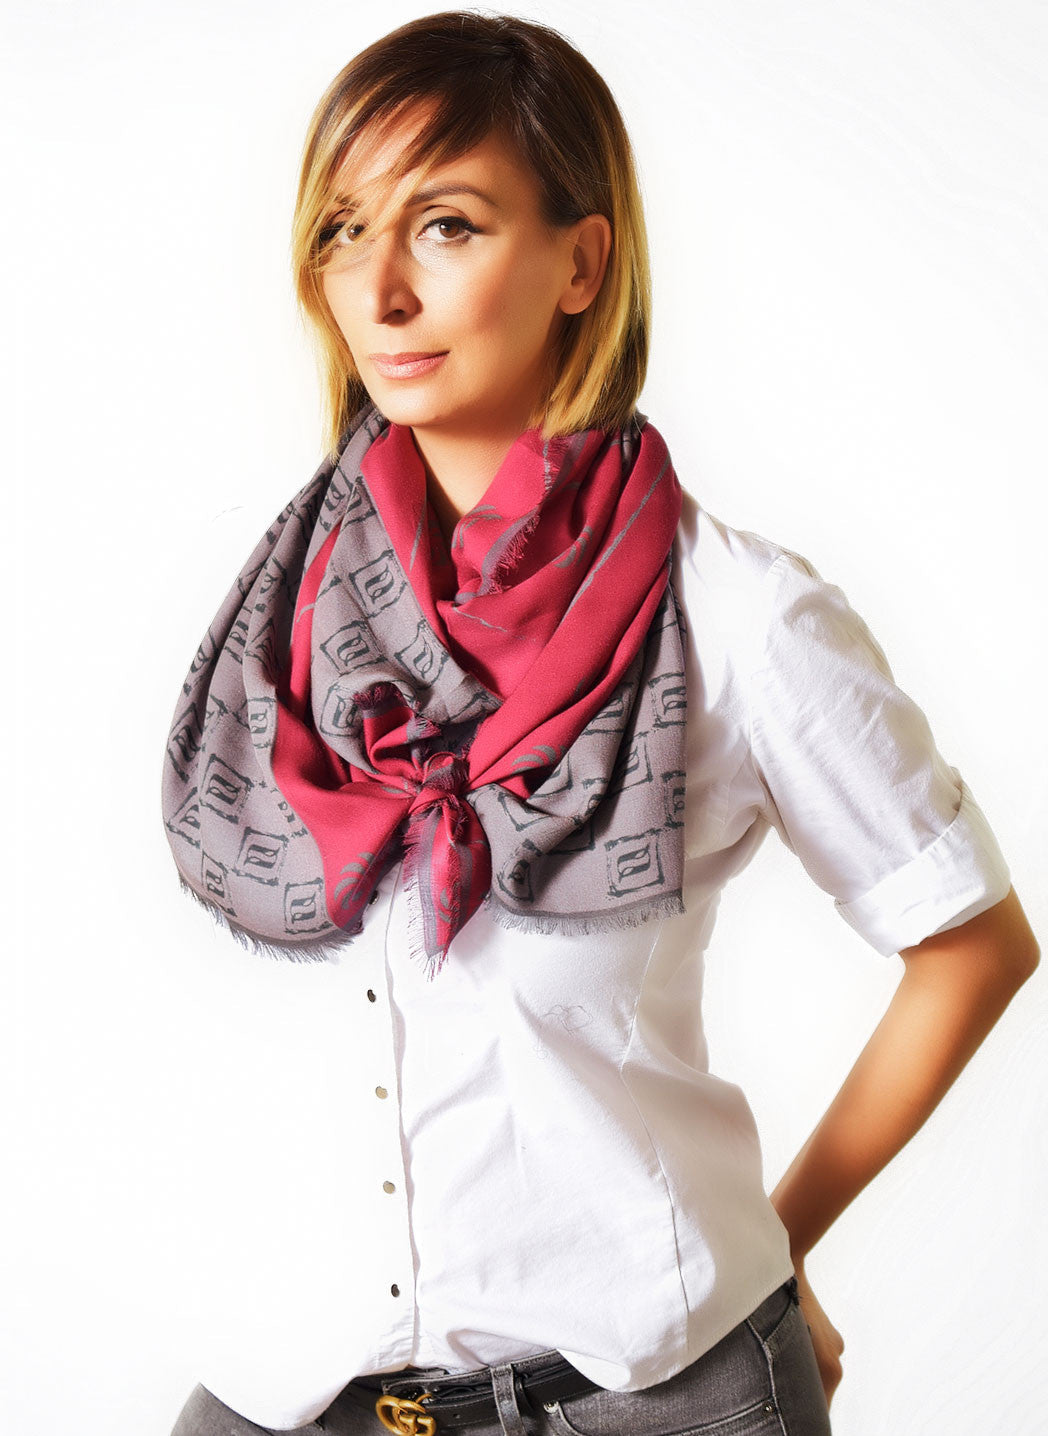 Eternity Burgundy Unisex Scarf - Anet's Collection - 2